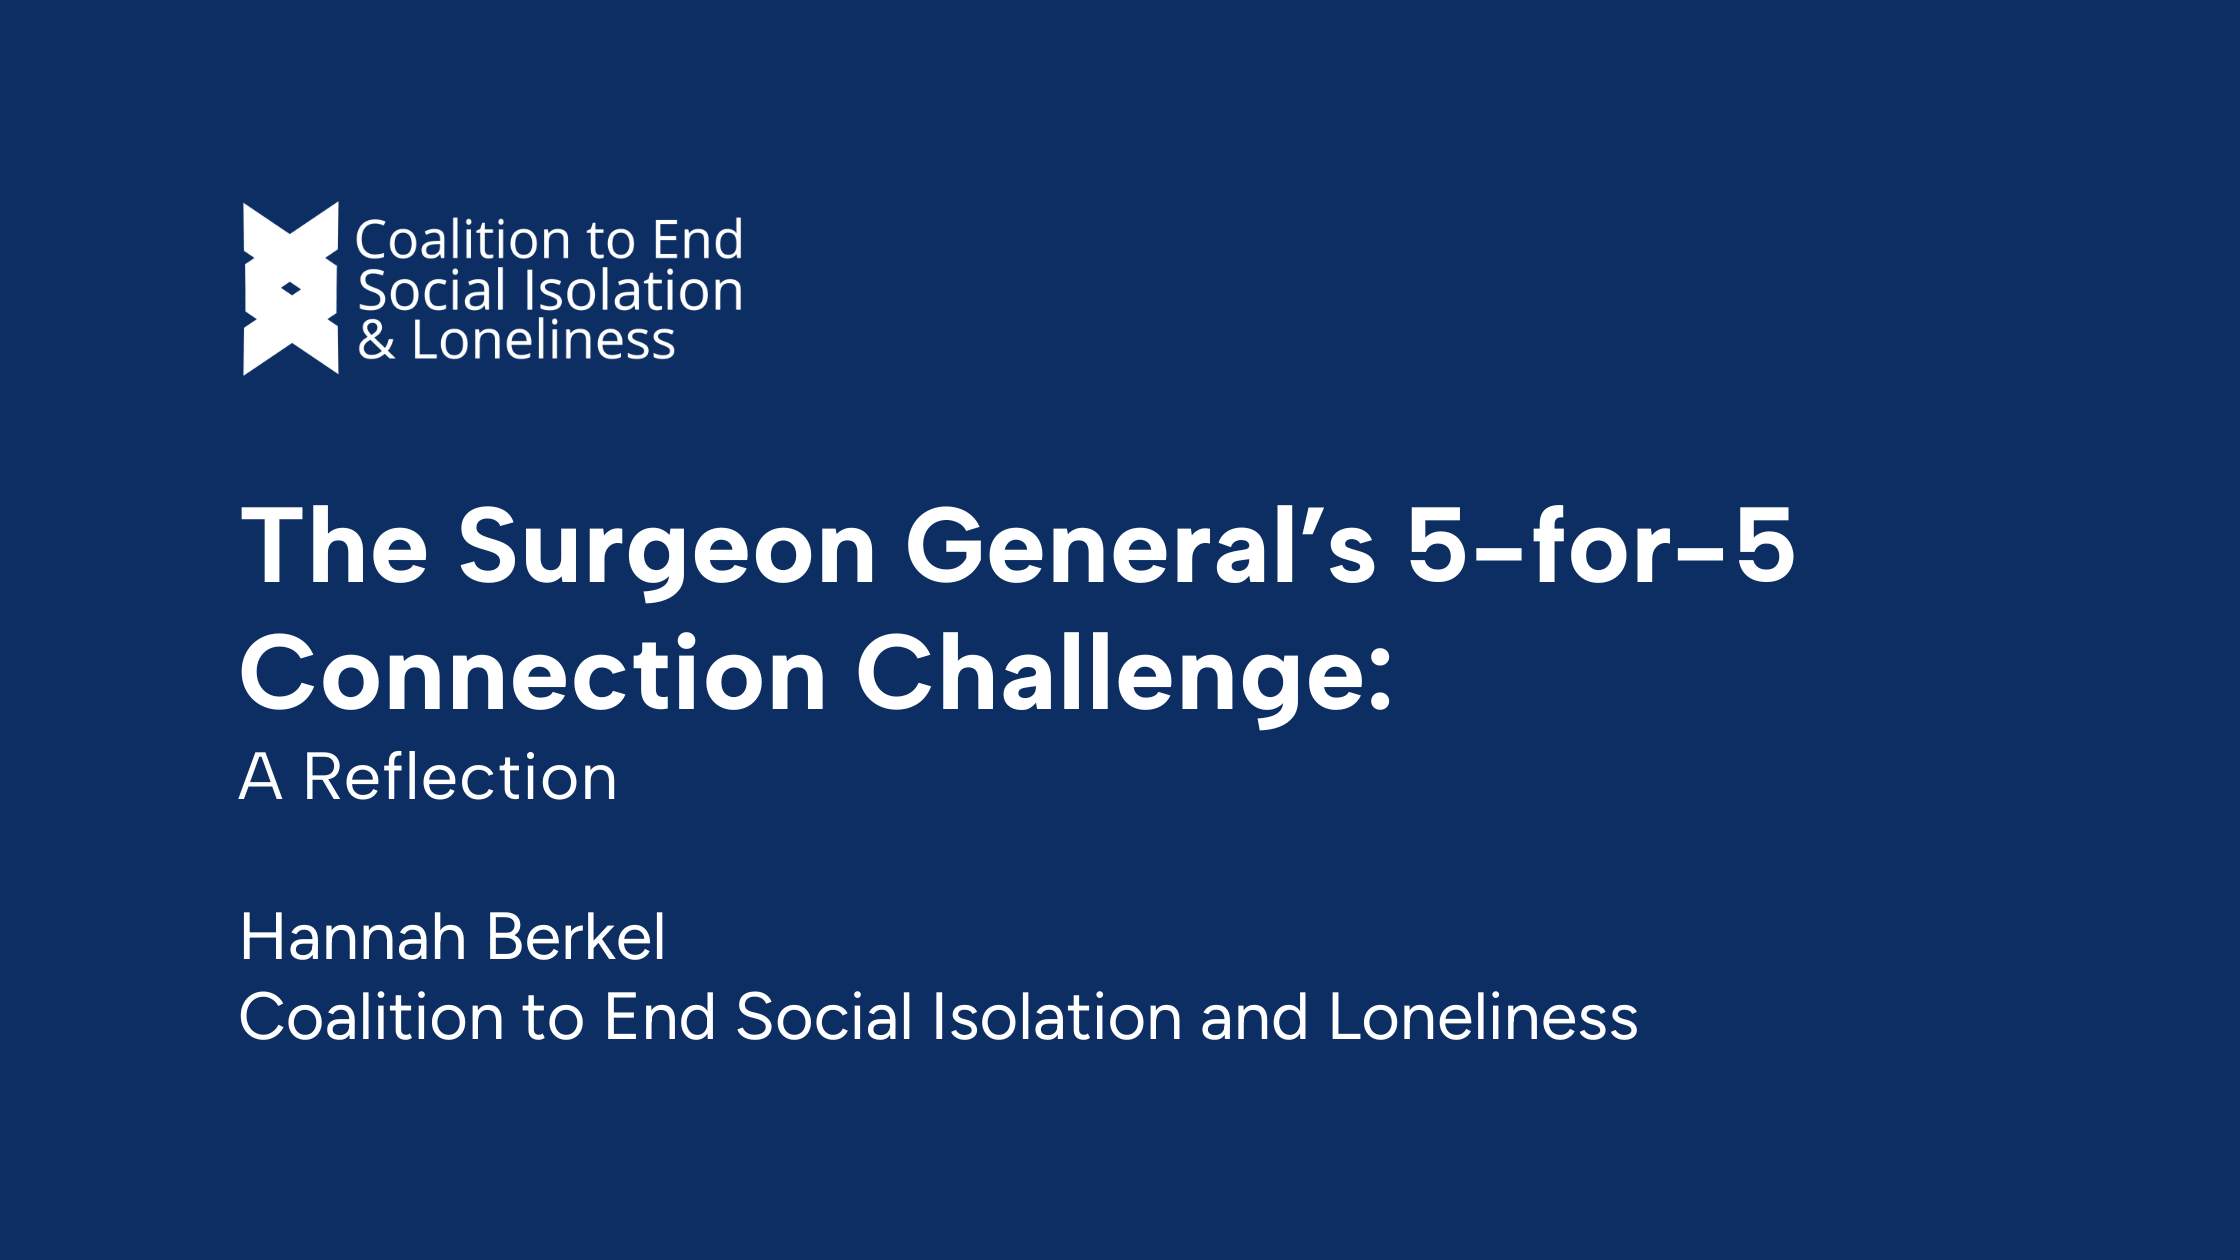 The Surgeon General’s 5-for-5 Connection Challenge: A Reflection